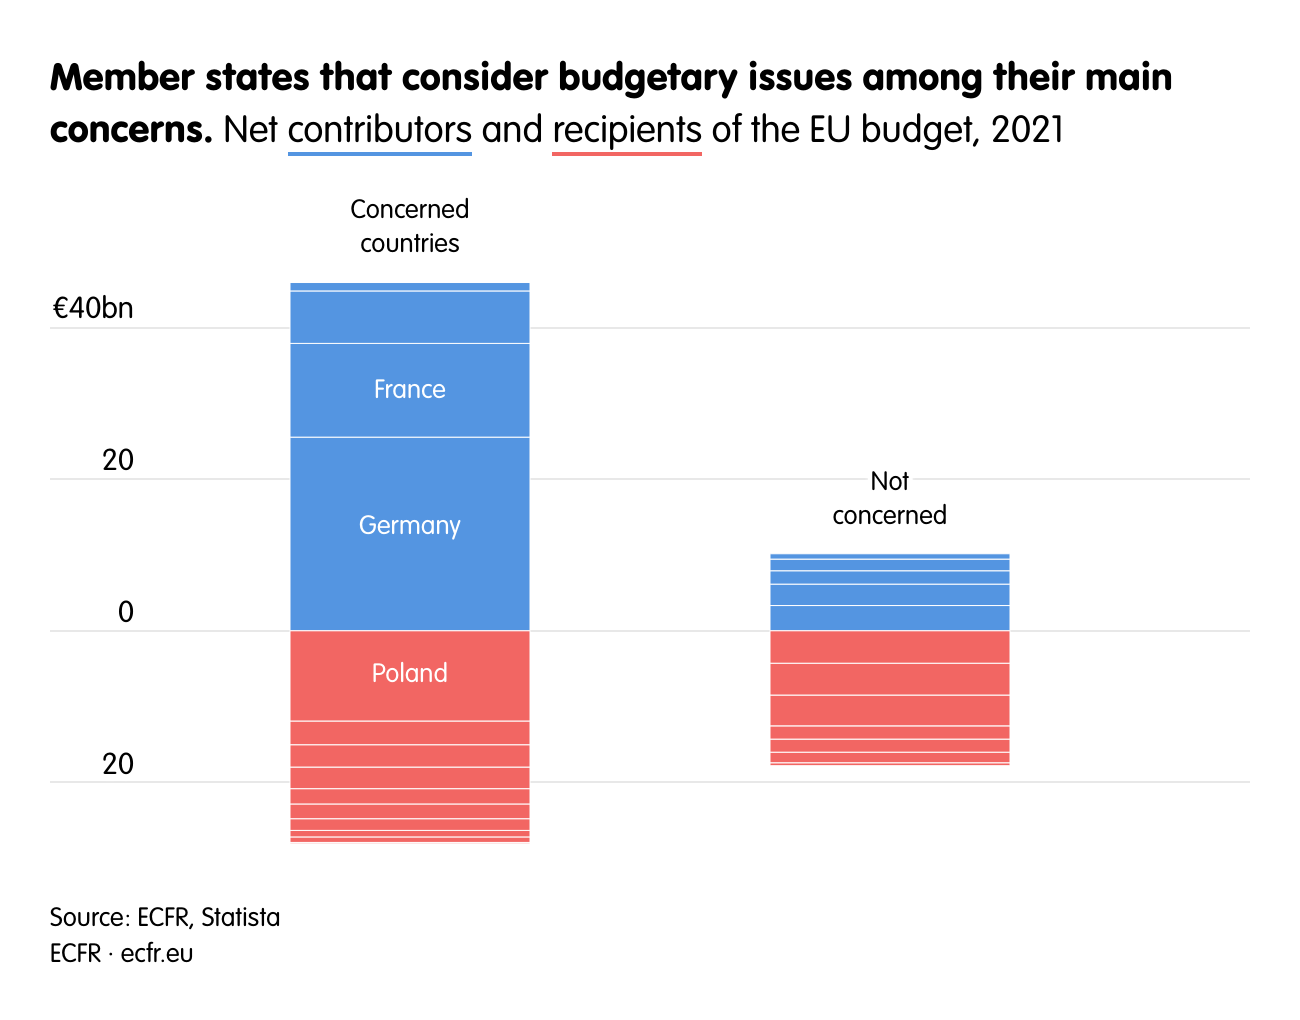 Member states that consider budgetary issues among their main concerns.